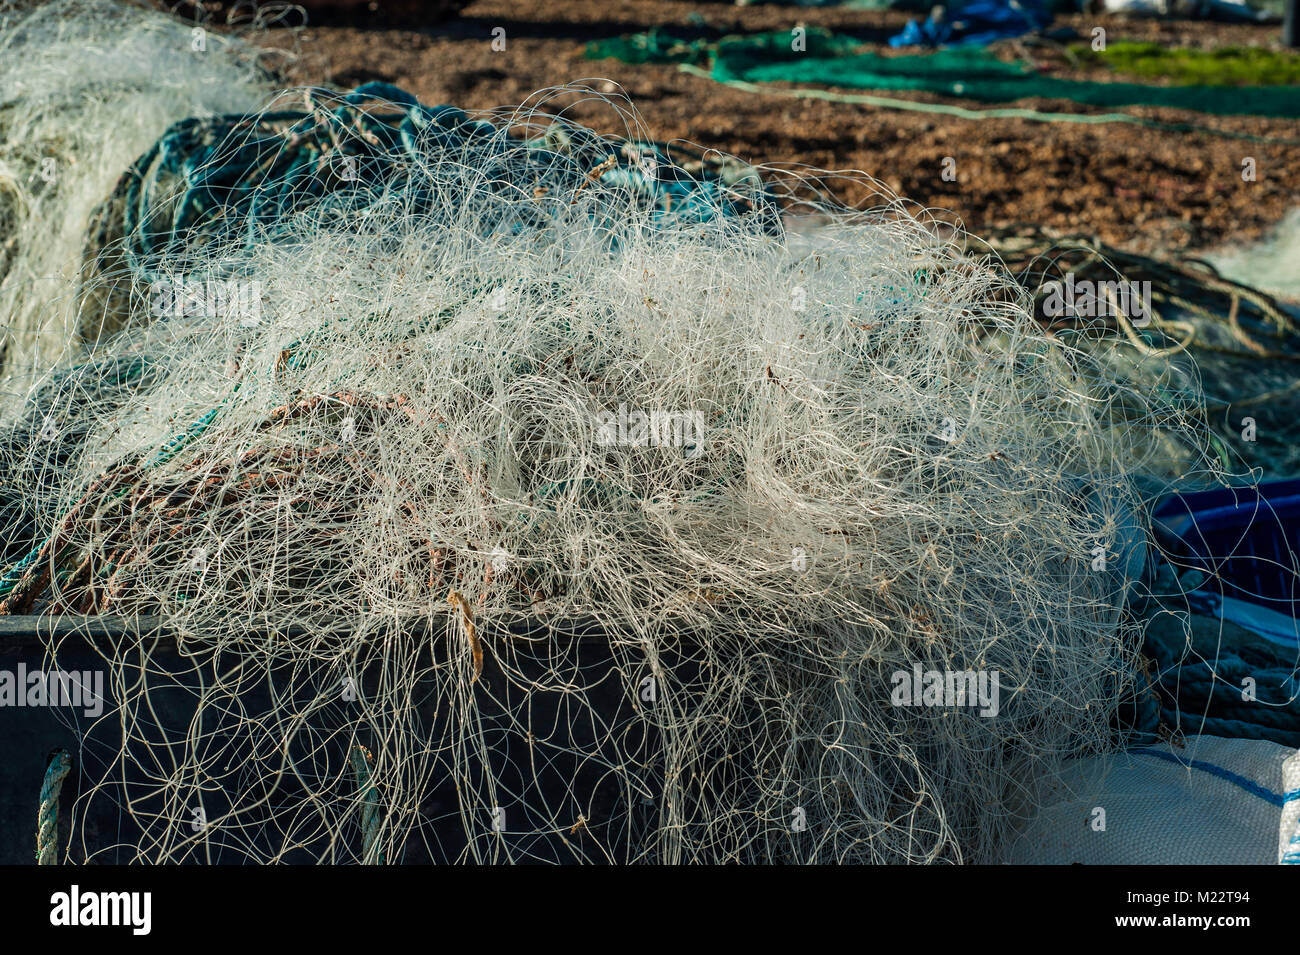 2,130 Tangled Fishing Line Images, Stock Photos, 3D objects, & Vectors